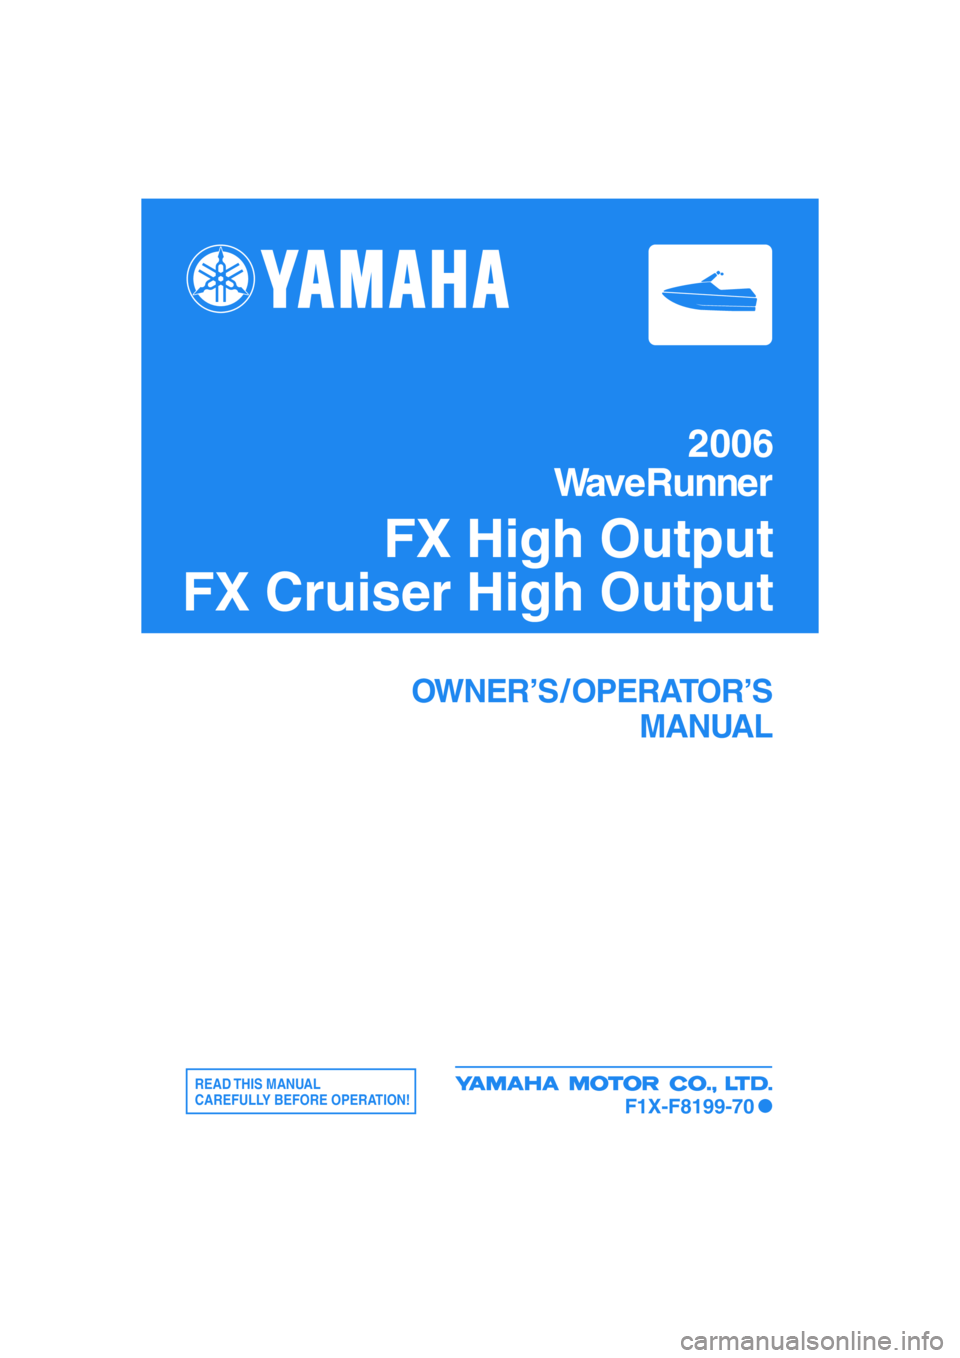 YAMAHA FX HO CRUISER 2006  Owners Manual 2006
WaveRunner
FX High Output
FX Cruiser High Output
OWNER’S / OPERATOR’S
MANUAL
READ THIS  MANUAL
CAREFULLY BEFORE OPERATION!
F1X-F8199-70 